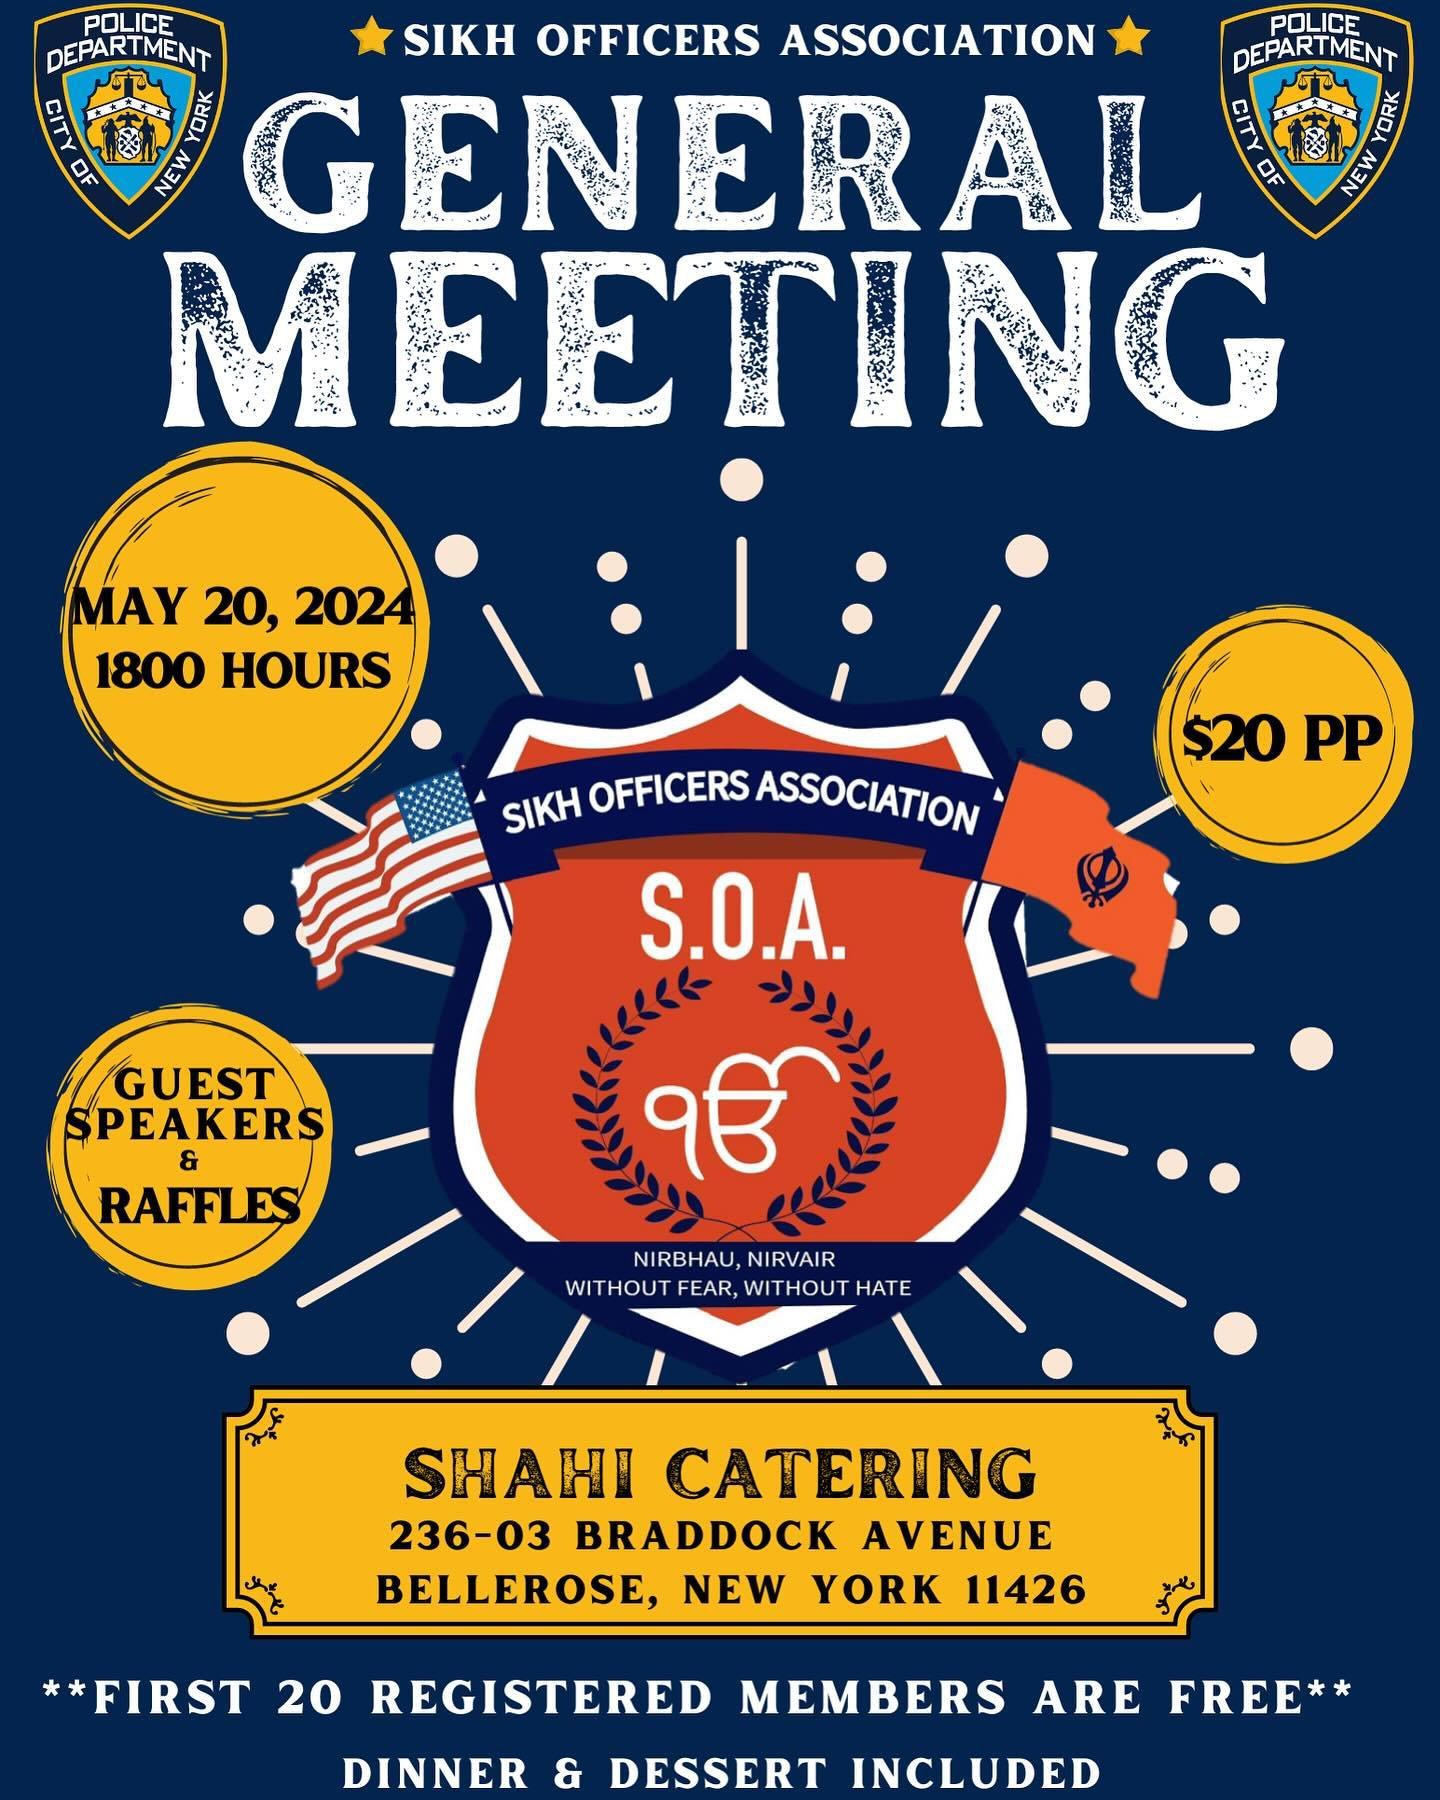 Sikh Officers Association will be hosting its general meeting on Monday, May 20th at 1800 hours at Shahi Catering located at 236-03 Braddock Avenue, Bellerose NY 11426. We will be going over our upcoming events. Special guest speakers will also join 